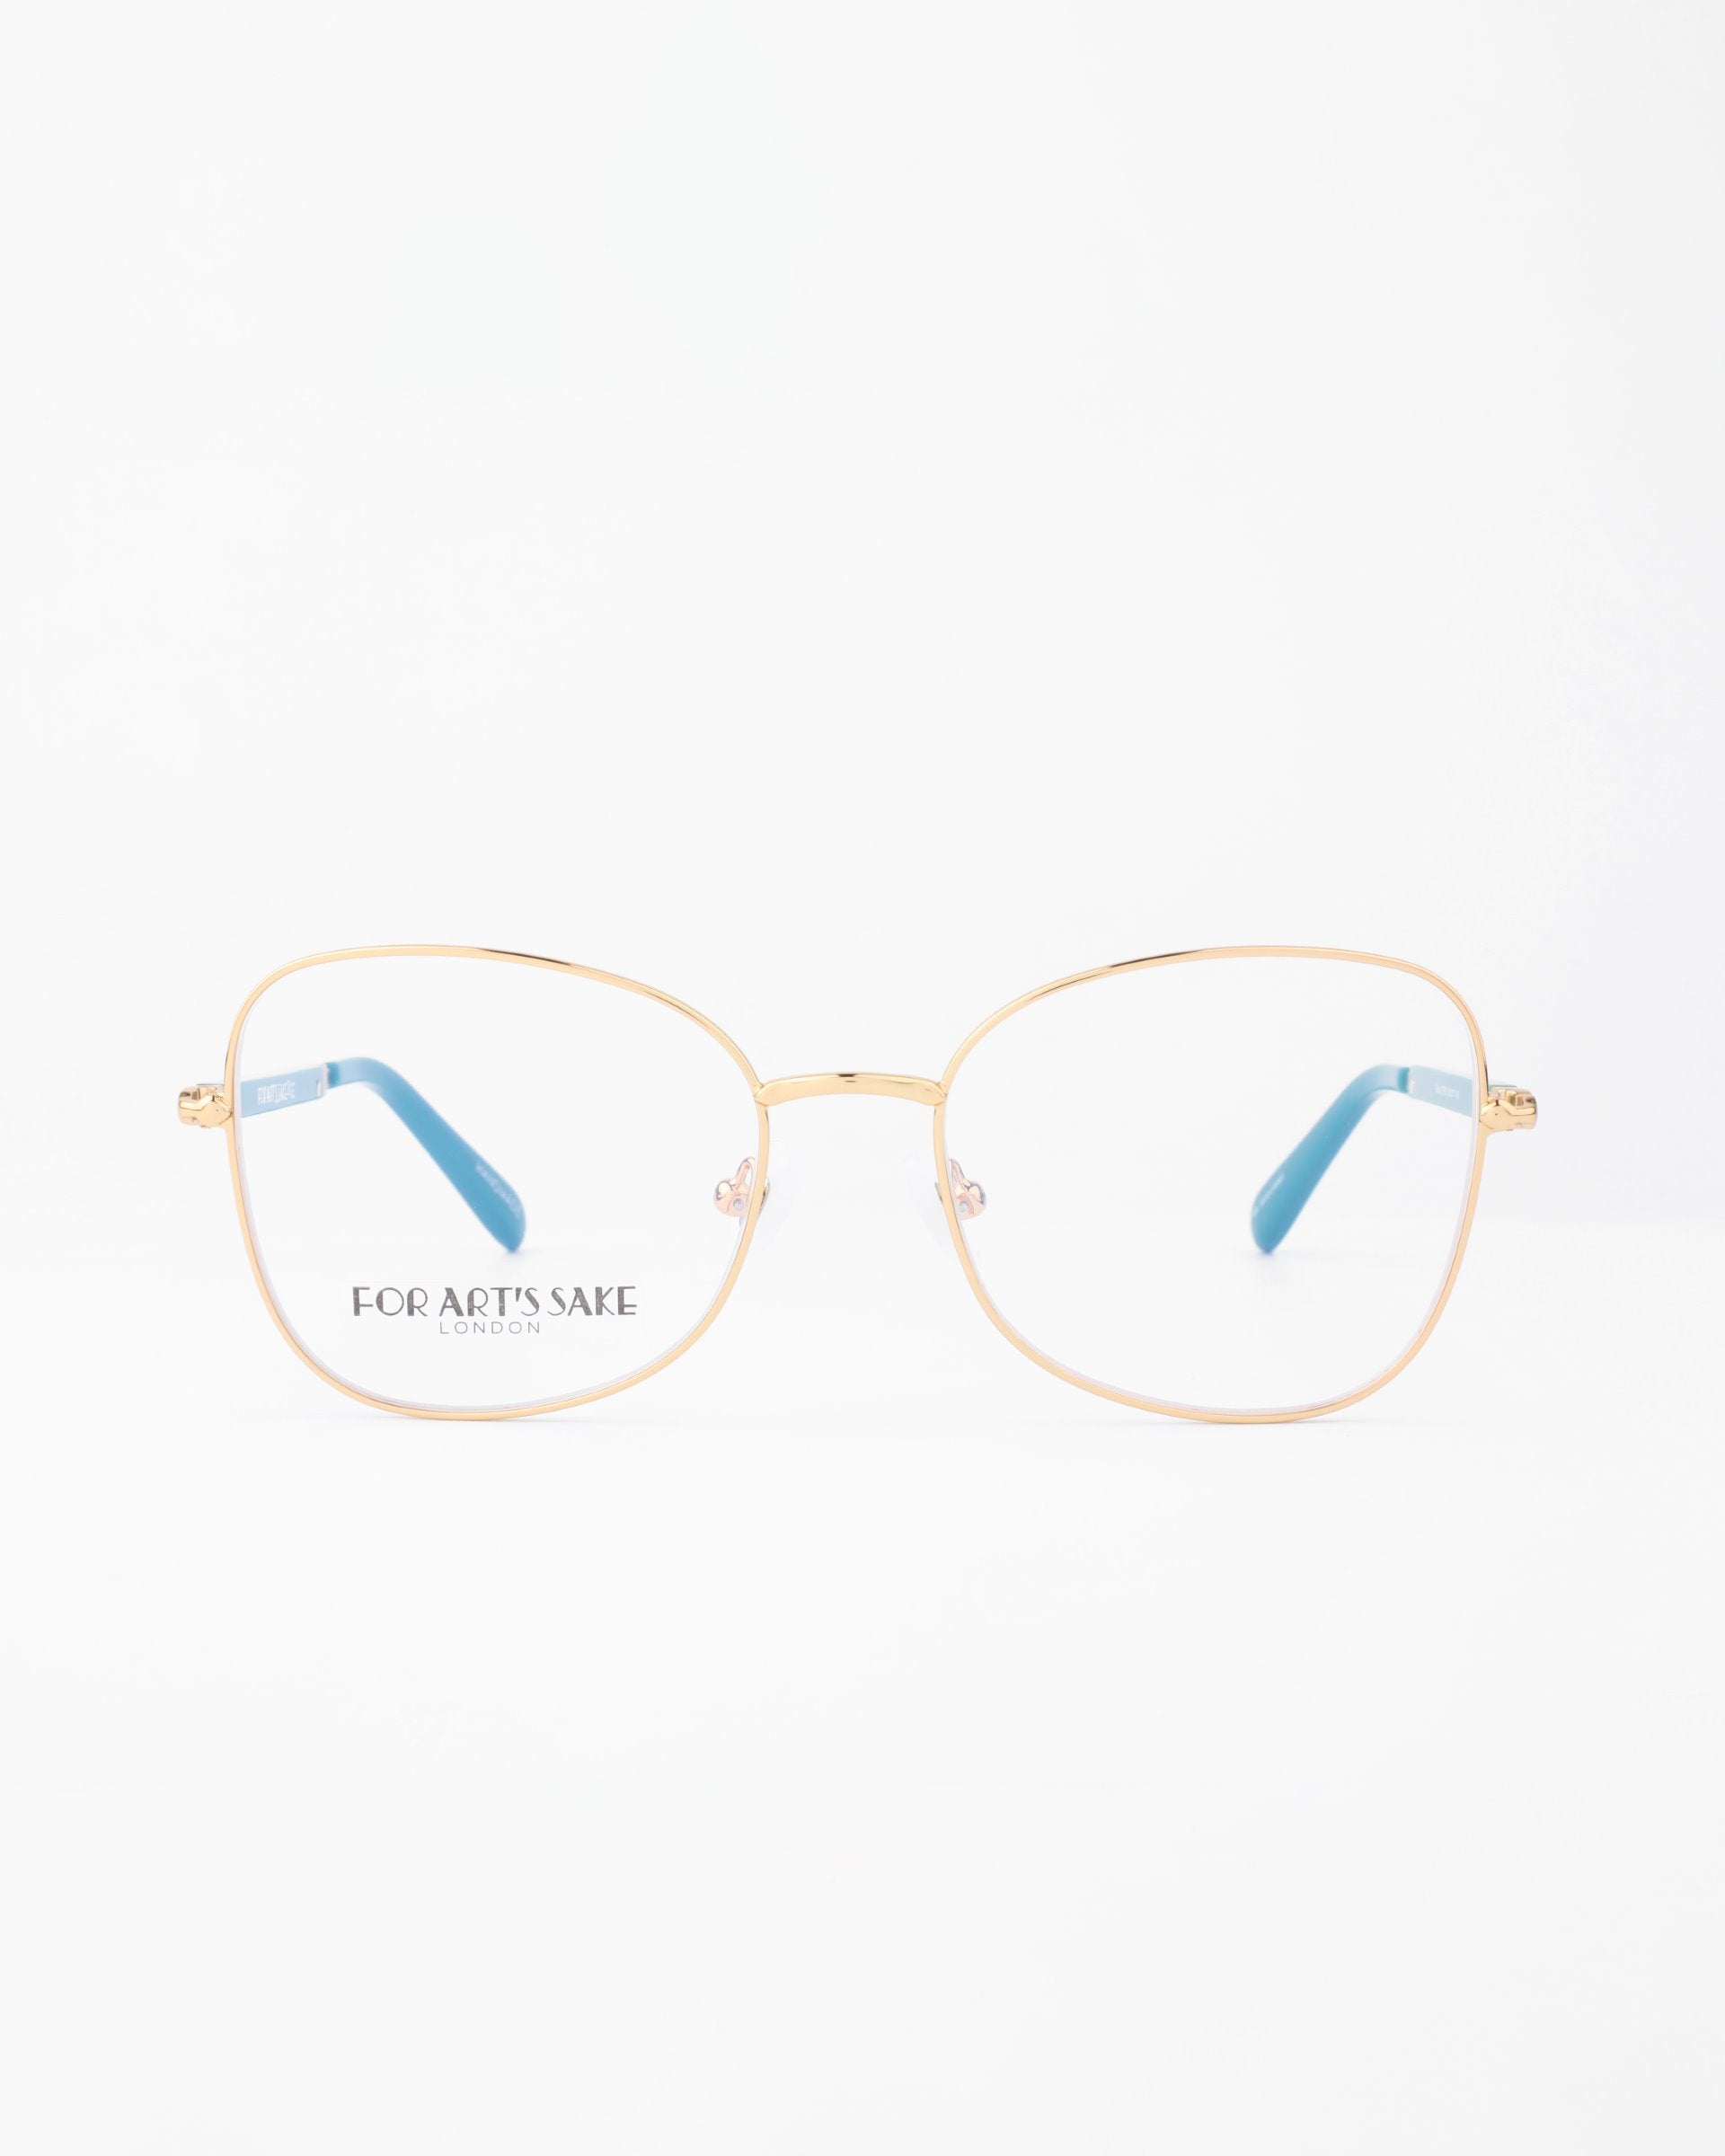 A pair of Grace eyeglasses by For Art's Sake® with thin, 18-karat gold-plated metal frames. The temples are gold with blue tips. The left lens has the phrase "FOR ART'S SAKE" printed on it. The background is plain white, emphasizing the eyeglasses.